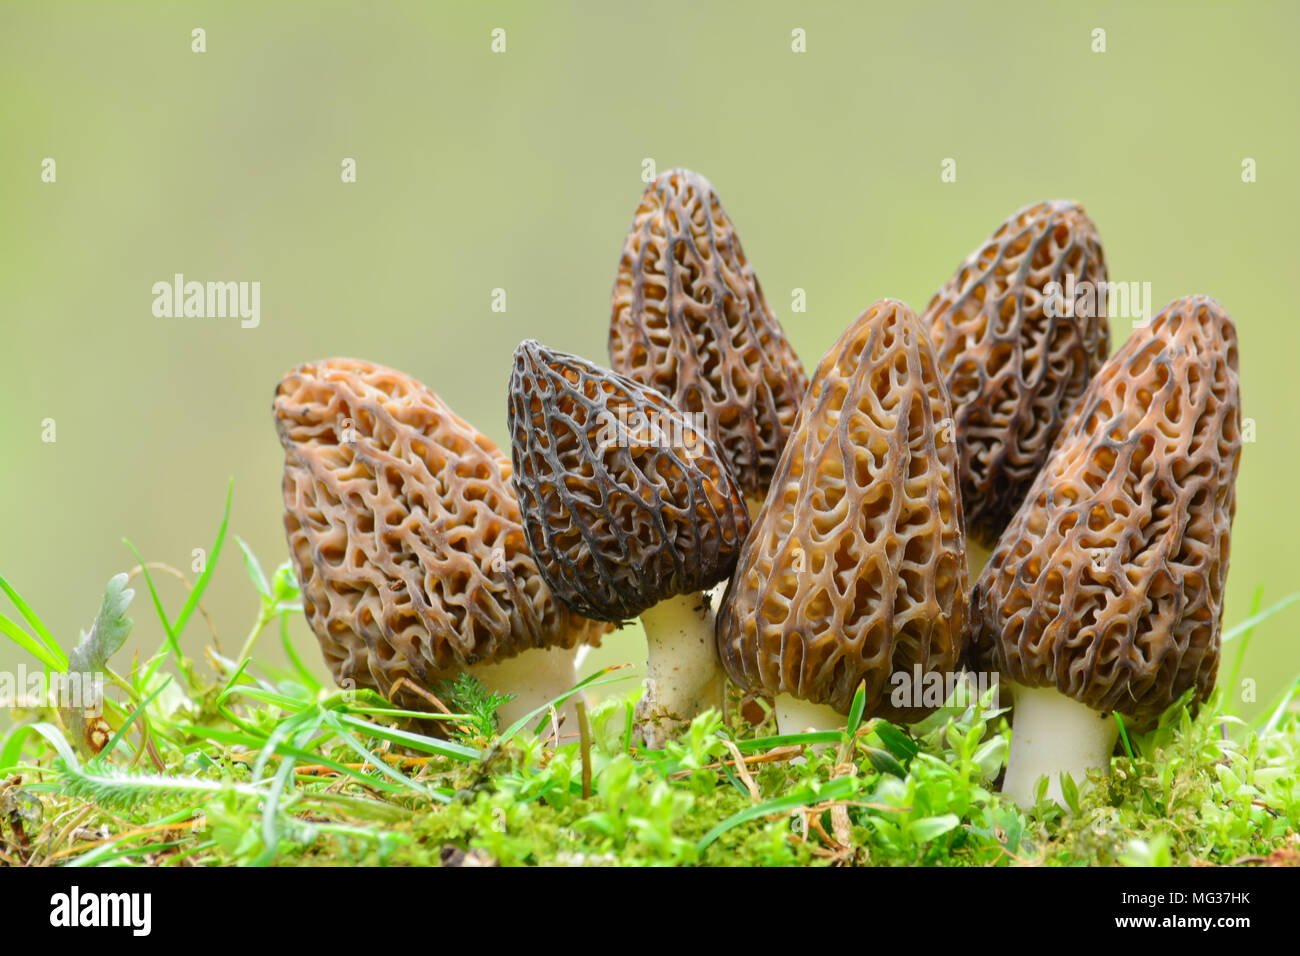 Big group of six nice and healthy specimen of Black Morel or Morchella conica mushrooms in a moss against blured, green background with copy space Stock Photo